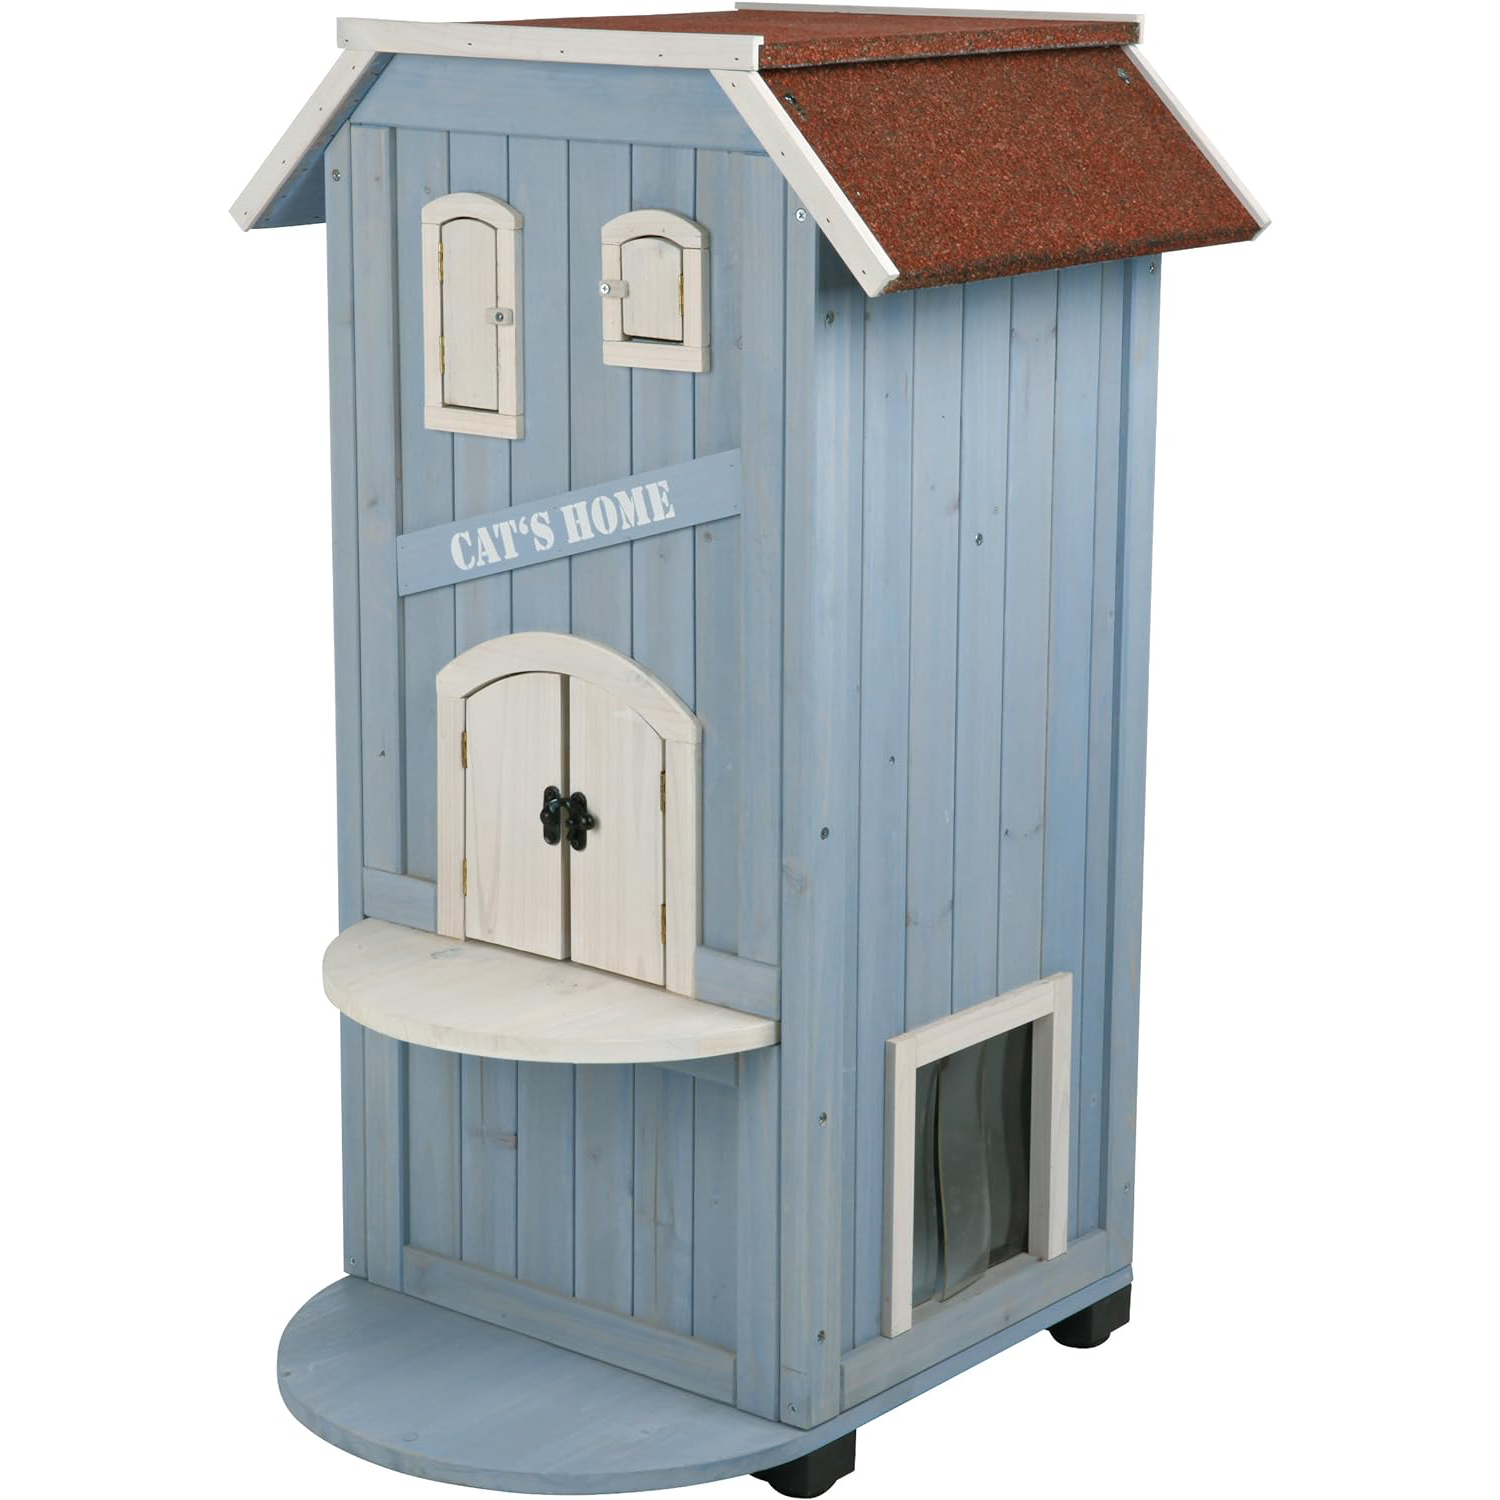 TRIXIE Pet Products 3-Story Cat_s House , 22 x 23 x 37 in. new